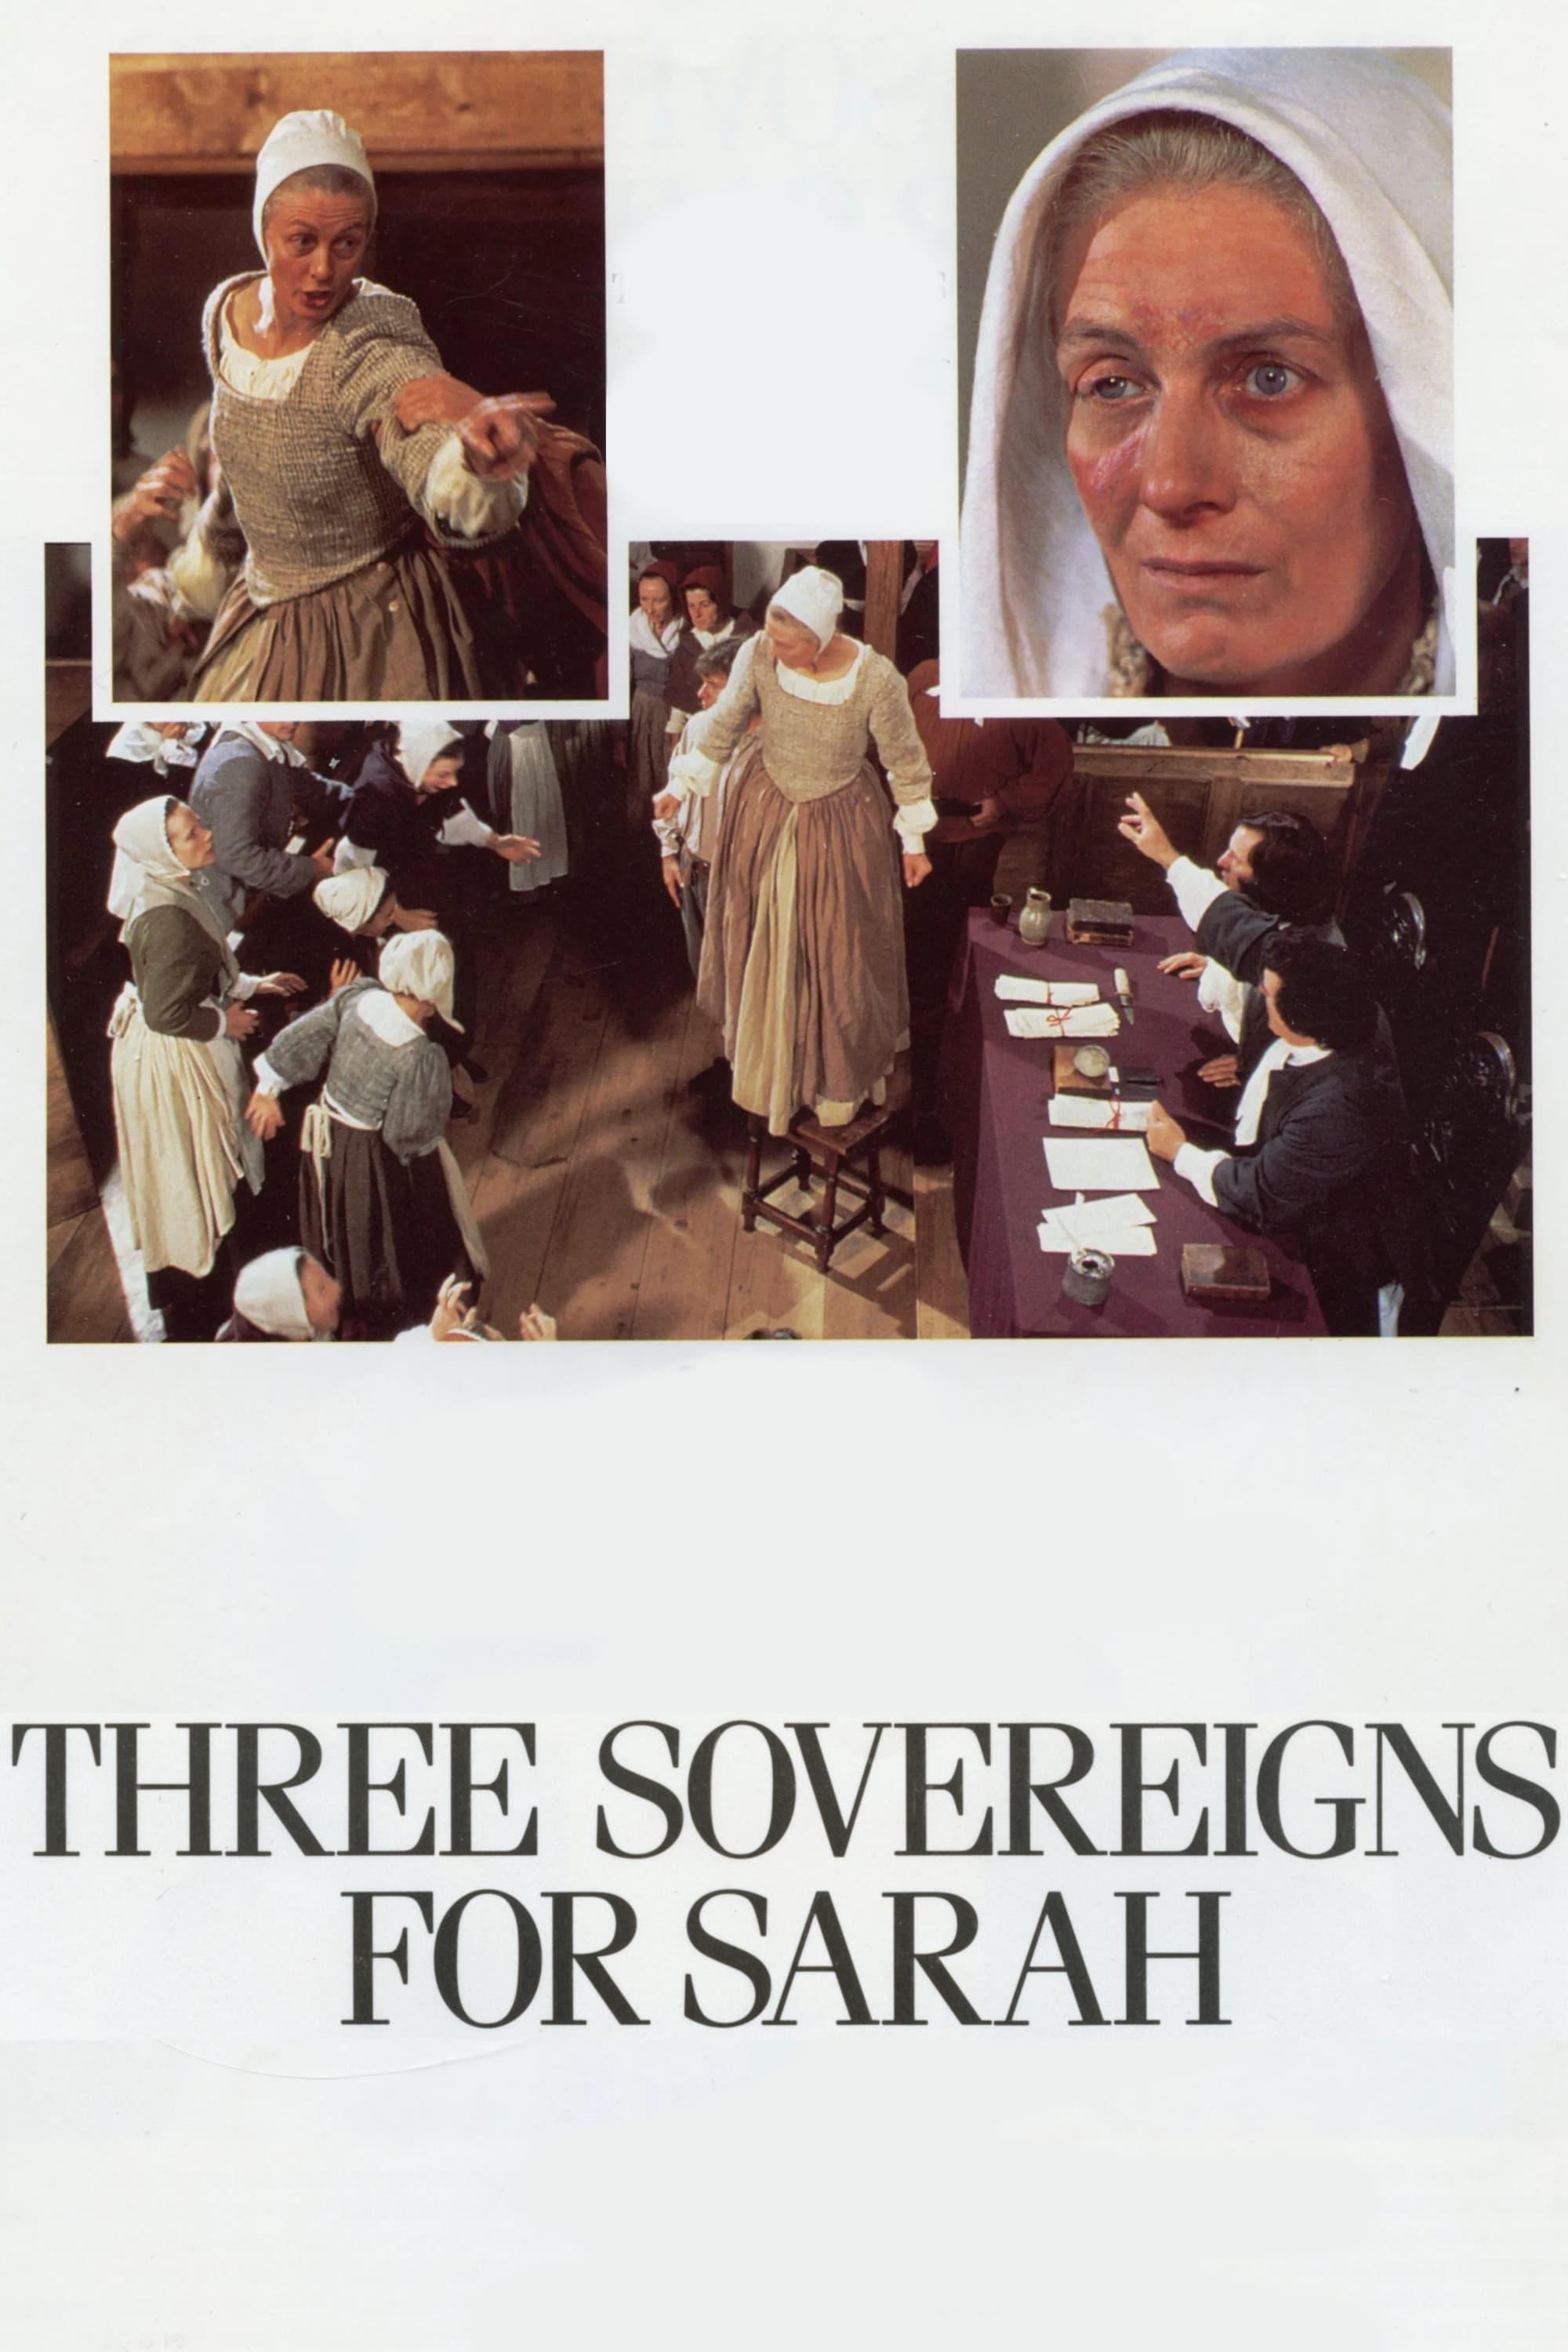 Three Sovereigns for Sarah poster